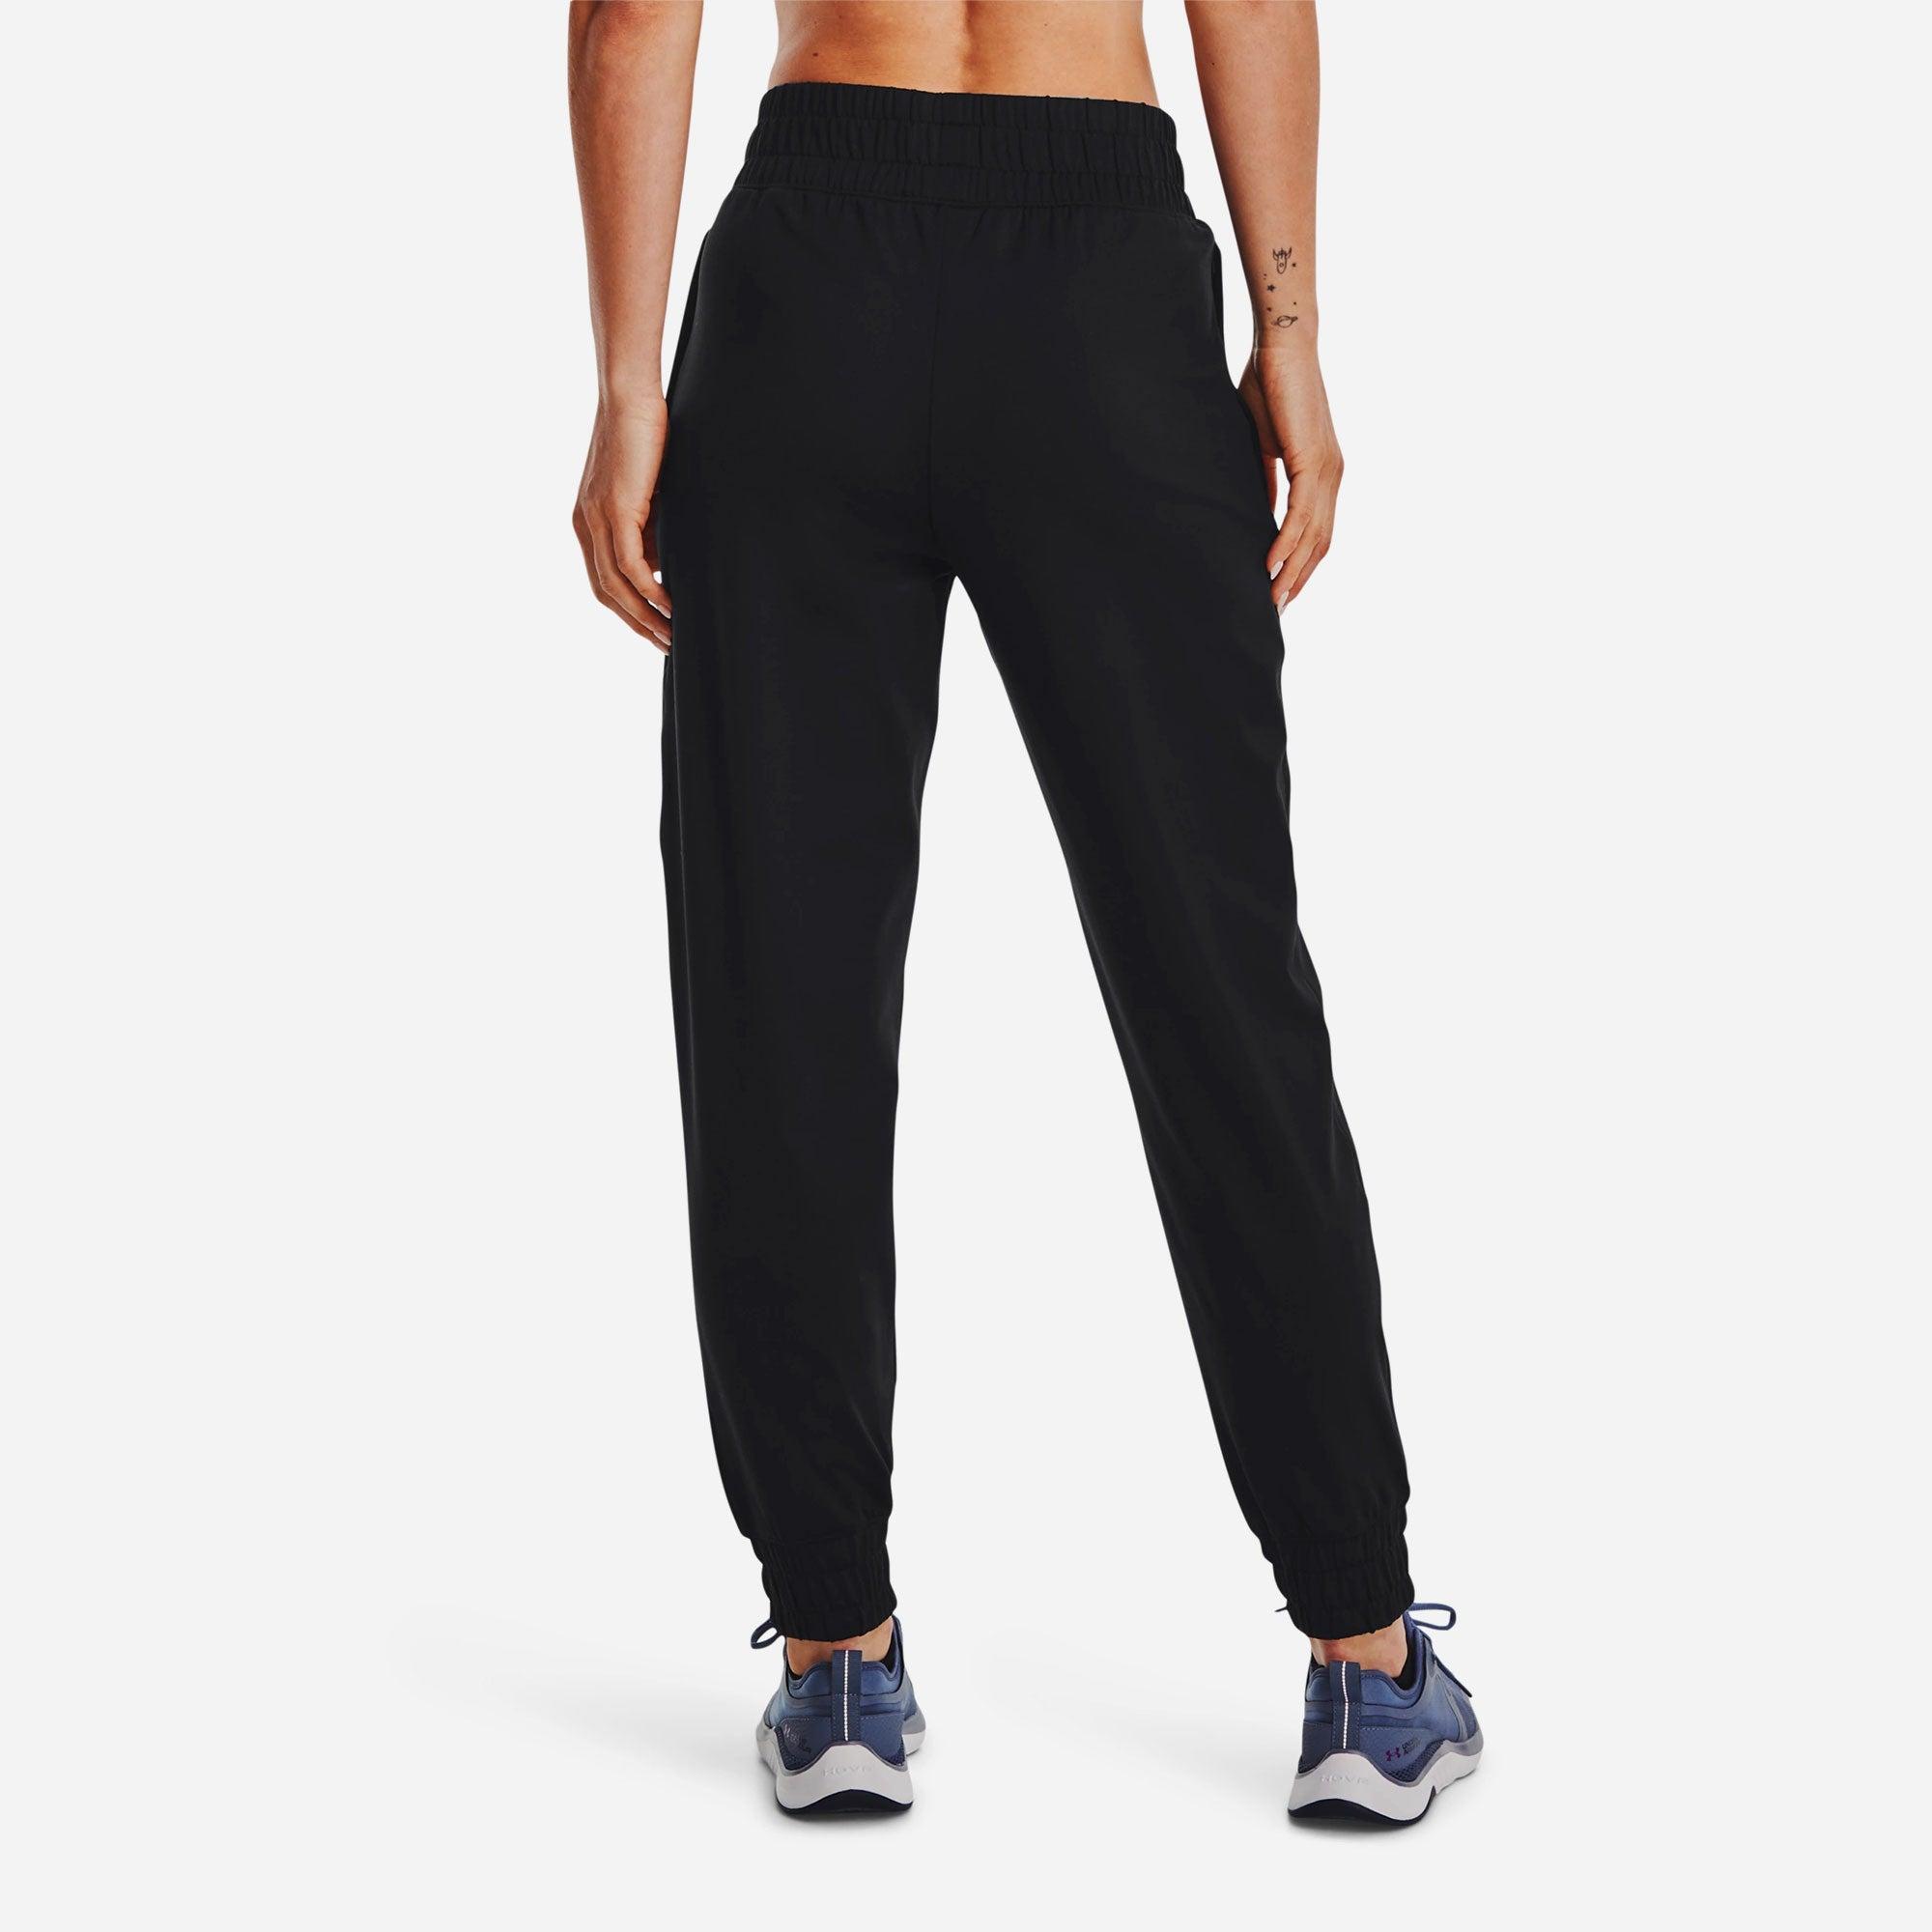 Quần thể thao nữ Under Armour Meridian - 1373967-001